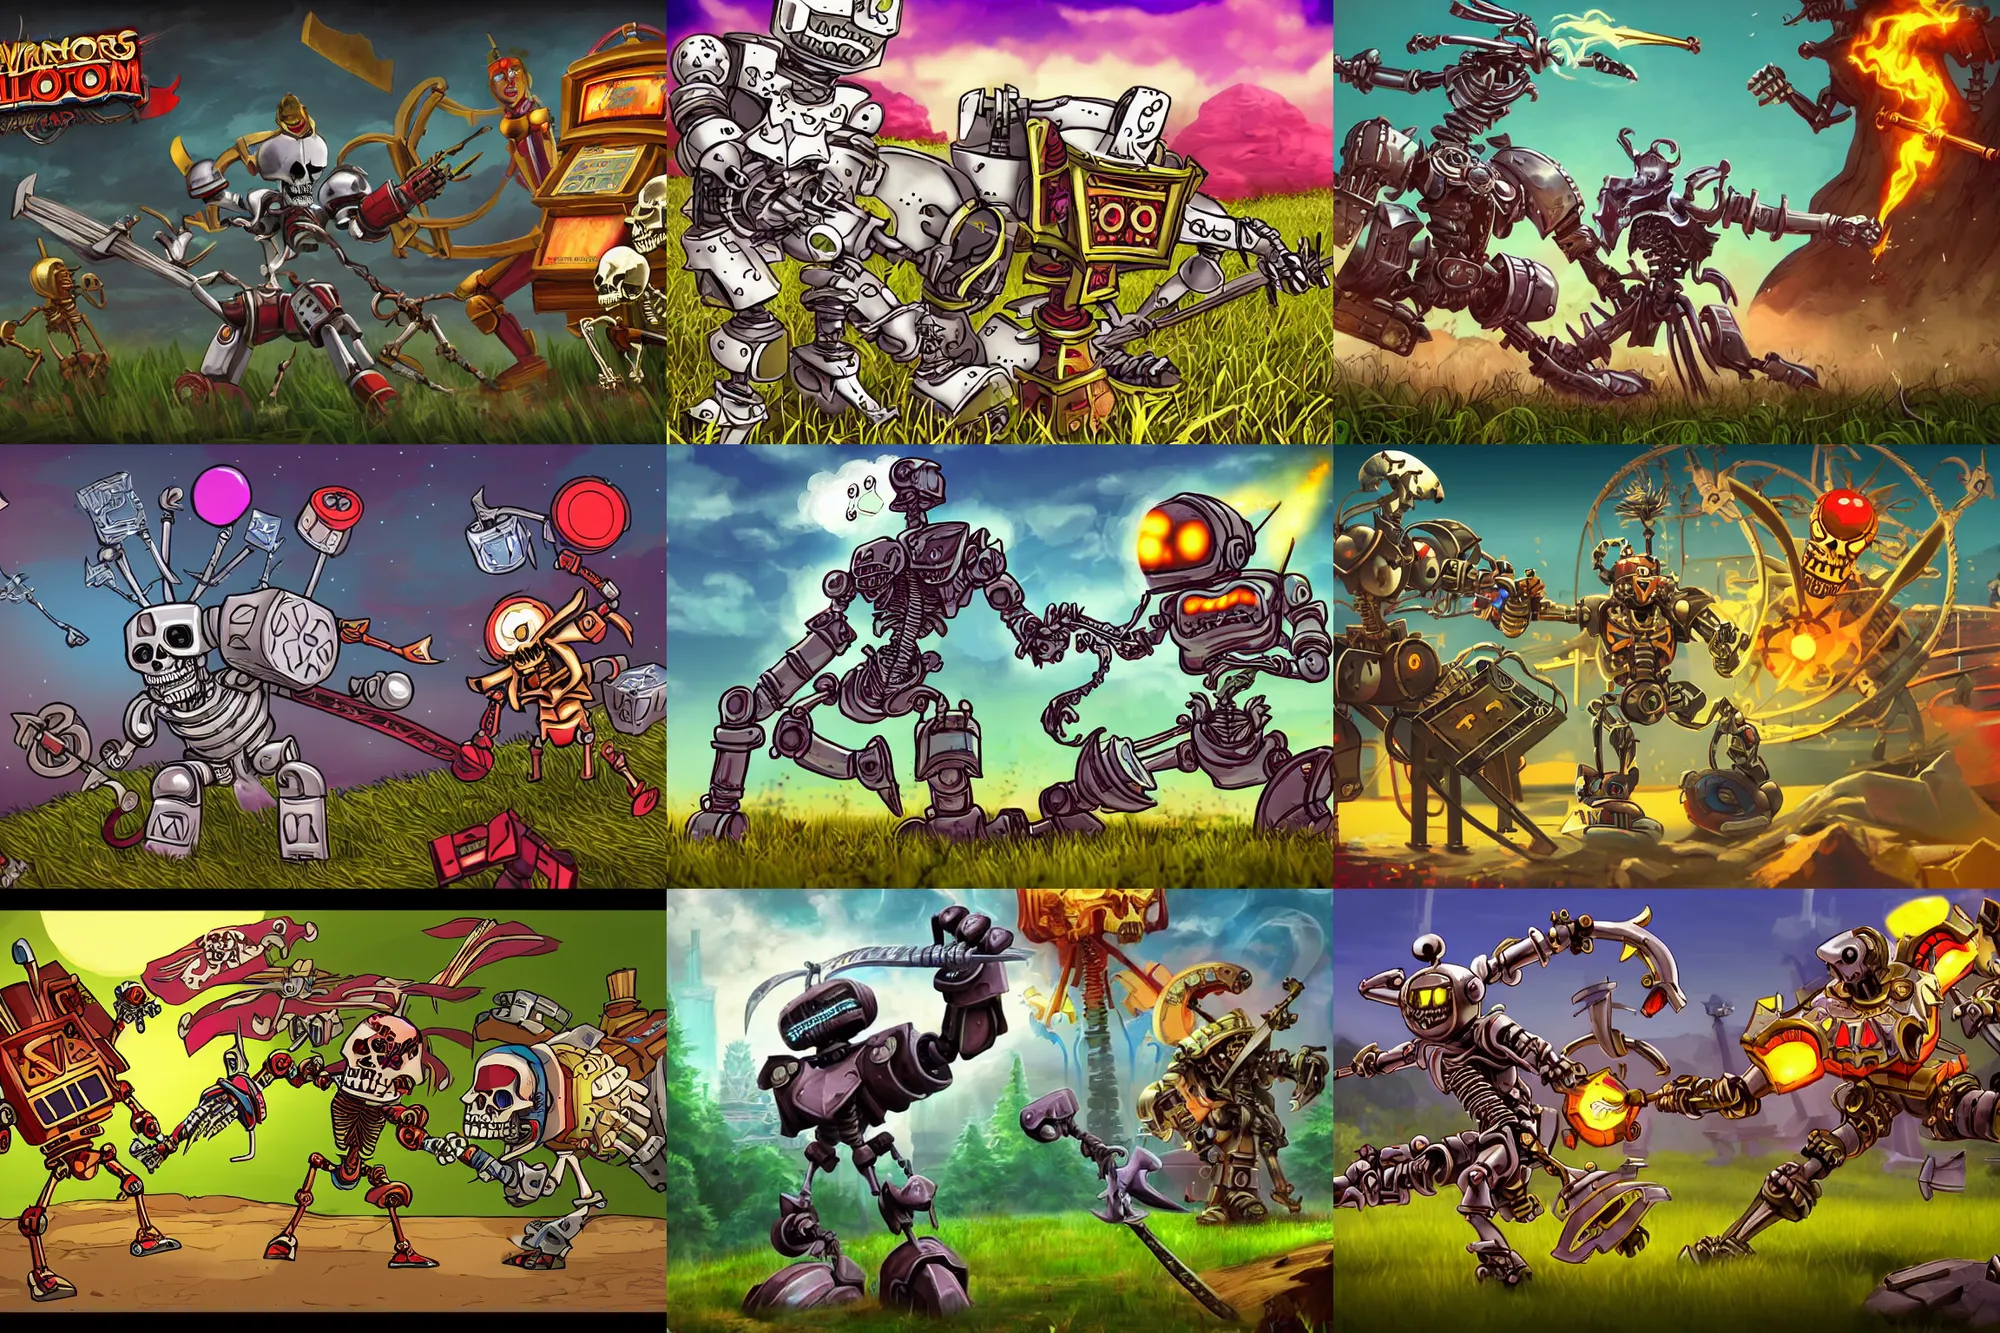 Prompt: a warrior robot with a slot machine reel chest, battling a skeleton with a sword. fantasy. promotional art for a video game on steam. casino. comic cartoon. battling in a grassy field. beautiful and simple.